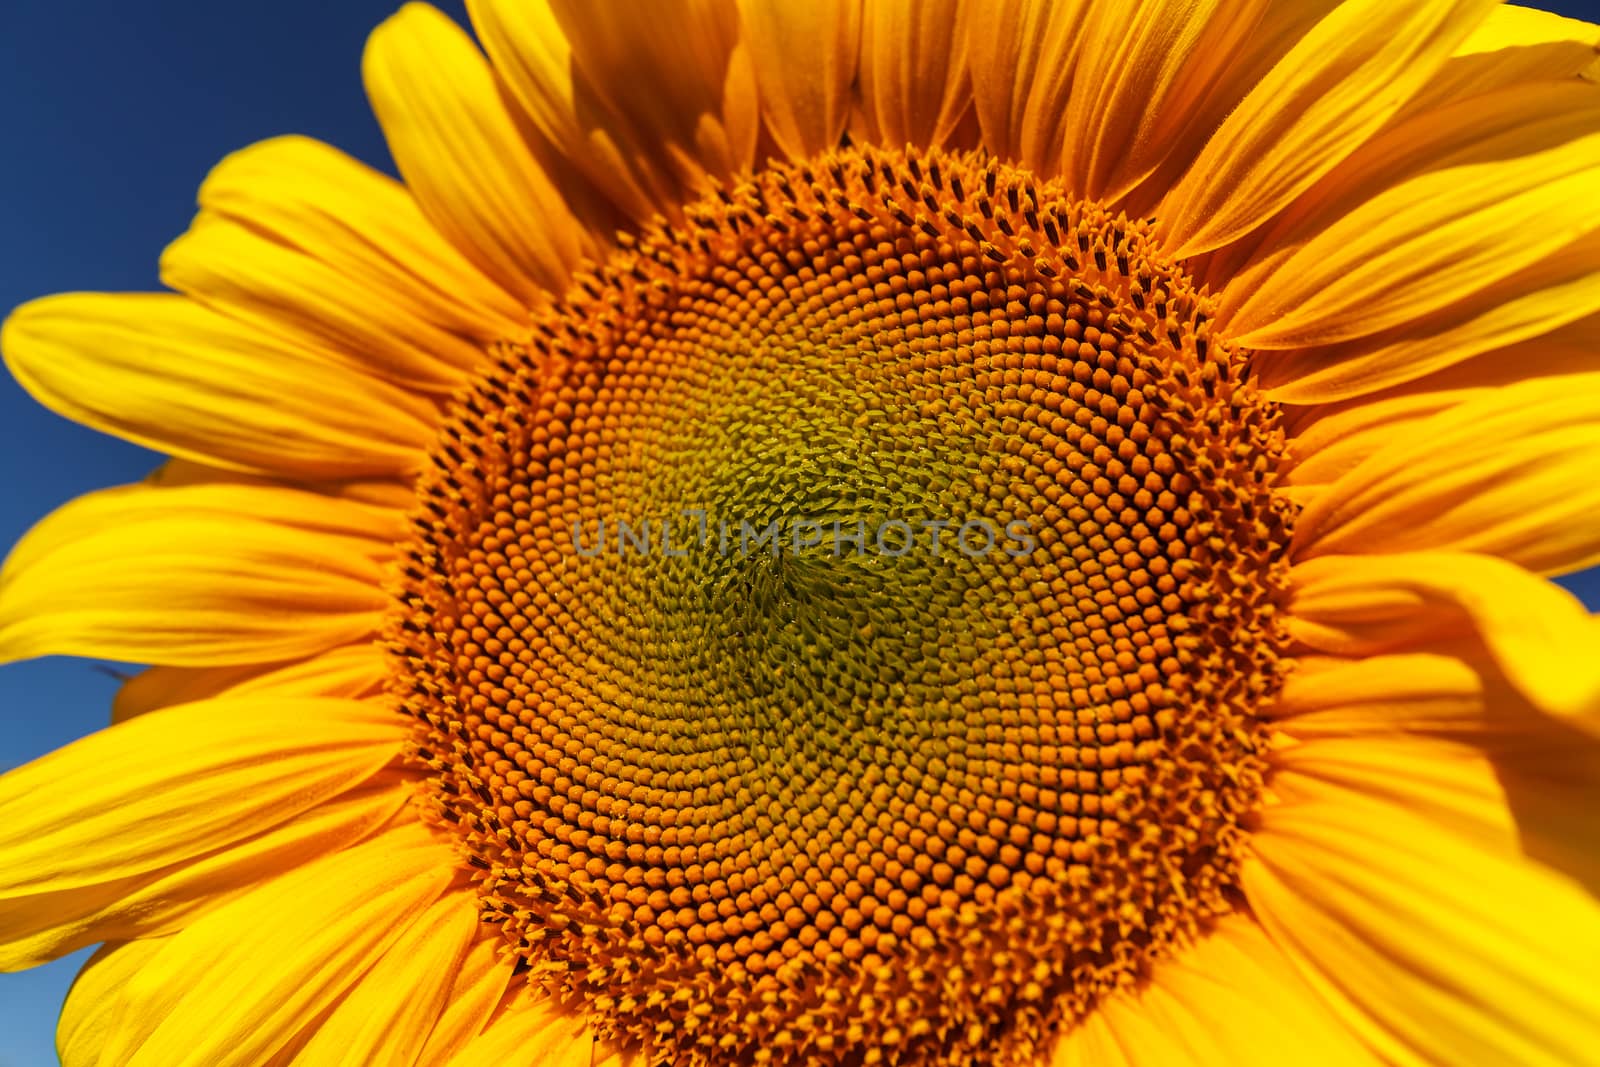 Flower of sunflower closeup on a background of blue sky